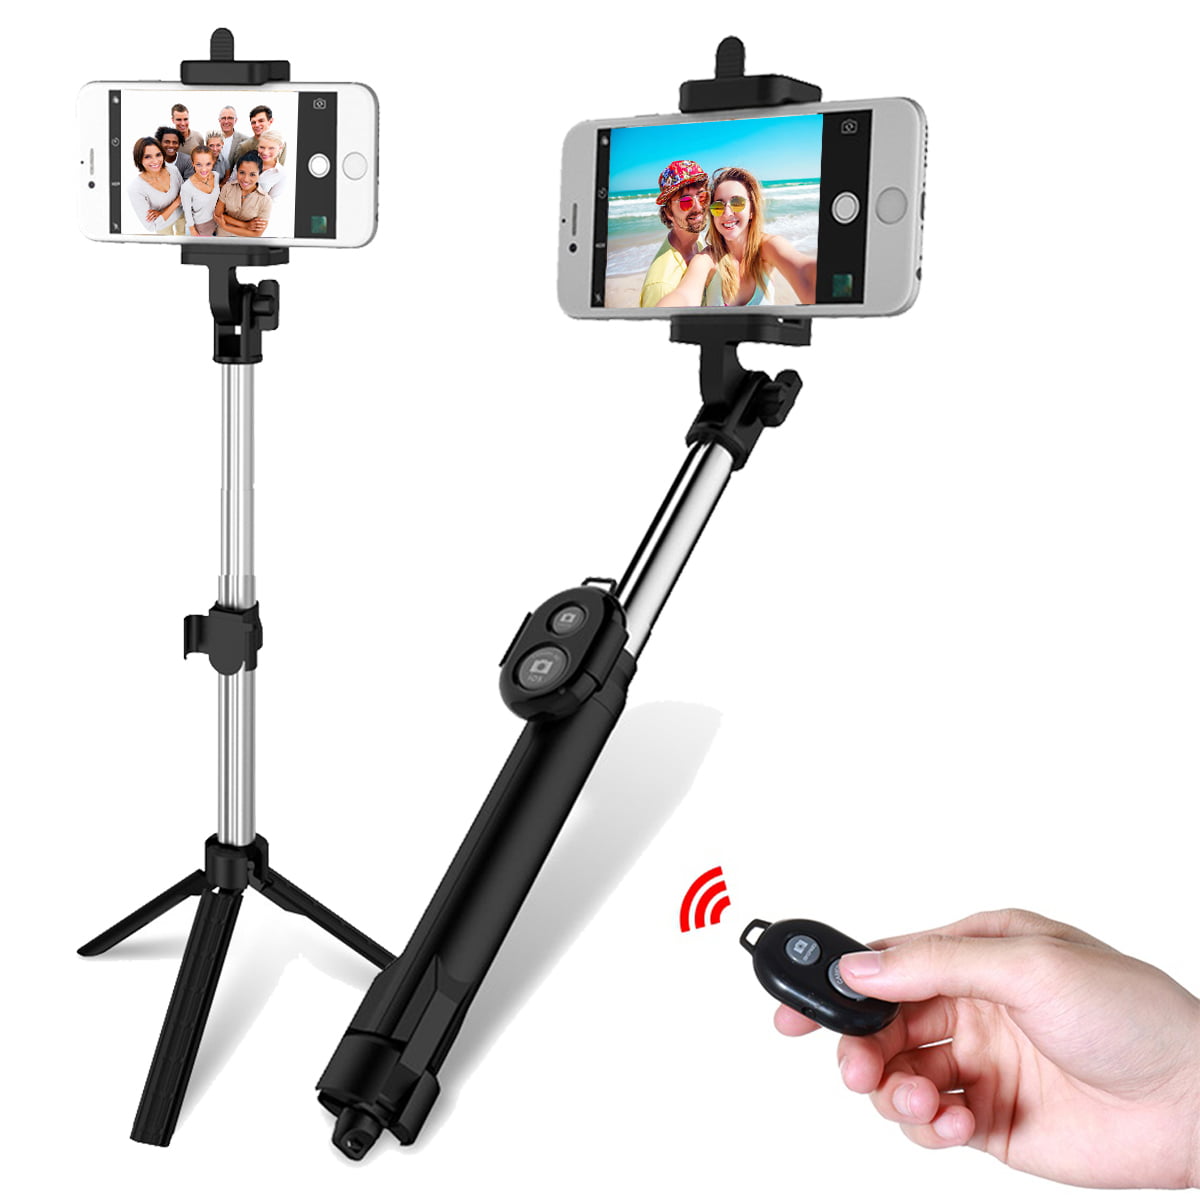 New Bluetooth Remote Control Camera Selfie Shutter Stick for iphone Android Phon 